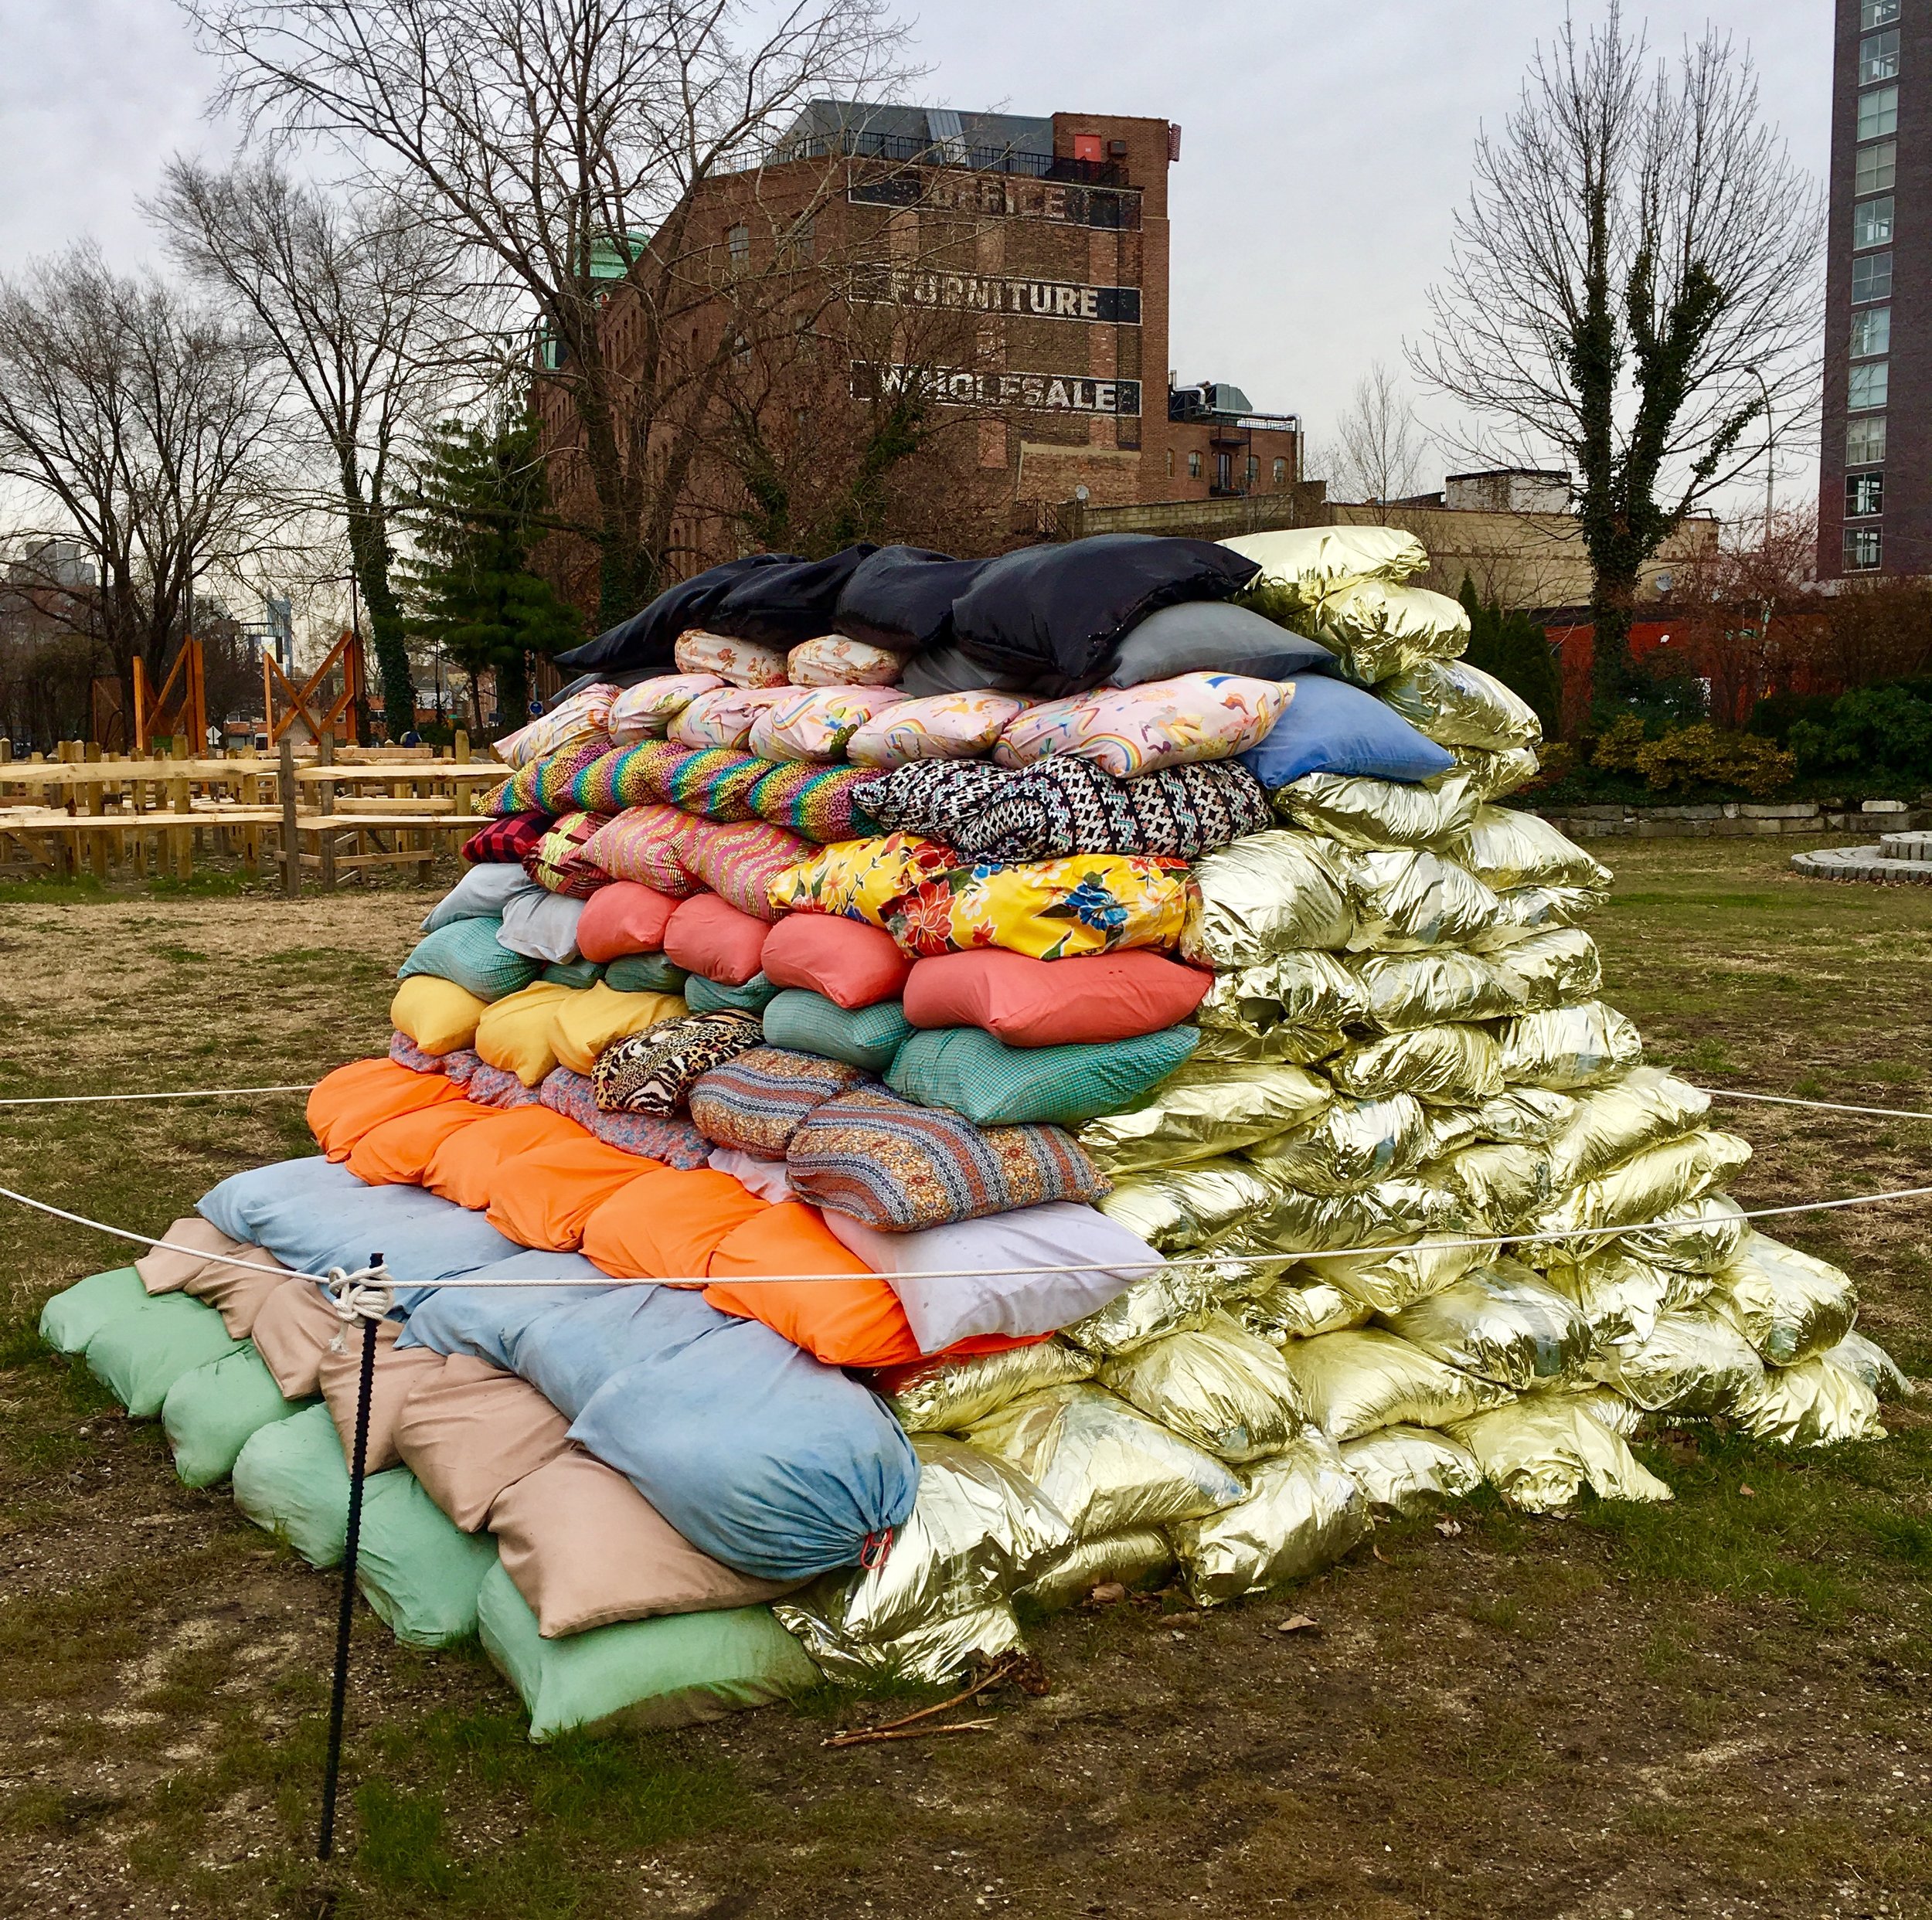  This enigmatic stack of sandbags is an artwork by Nancy Nowacek called “Maneuver” that&amp;#39;s being exhibited at Socrates Sculpture Park. 